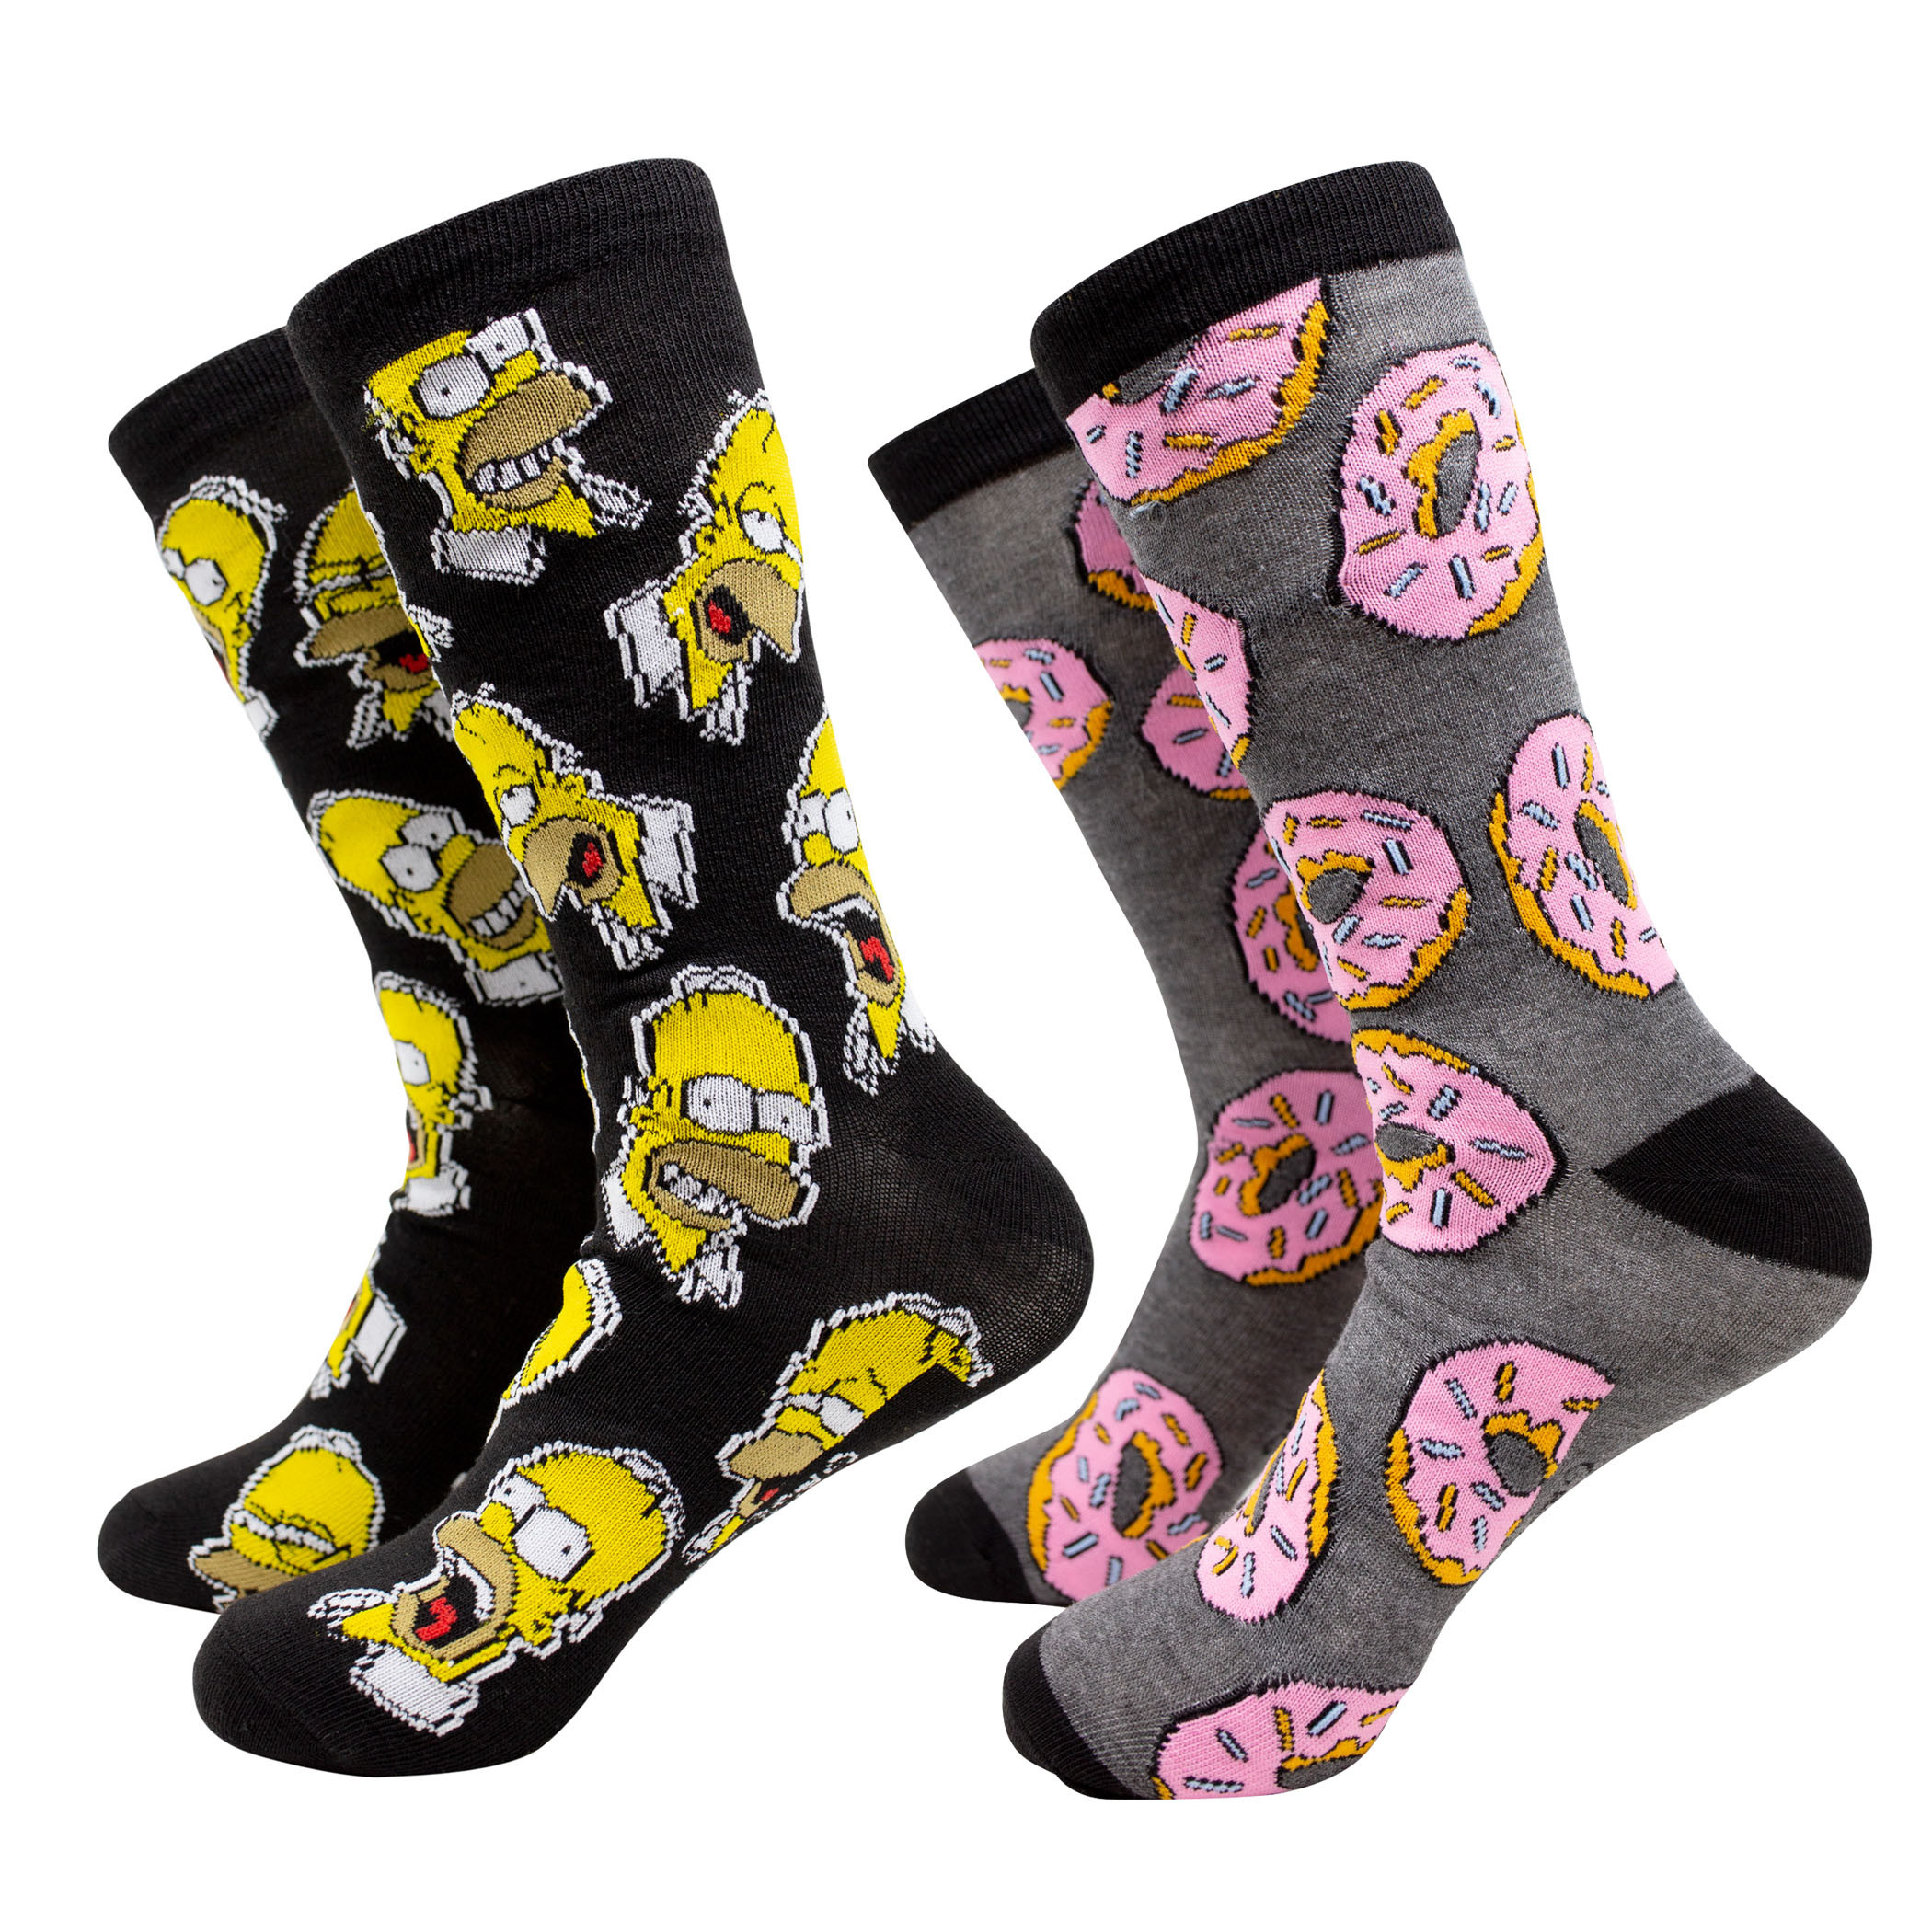 The Simpsons Homer and Donuts 2-Pack Crew Socks